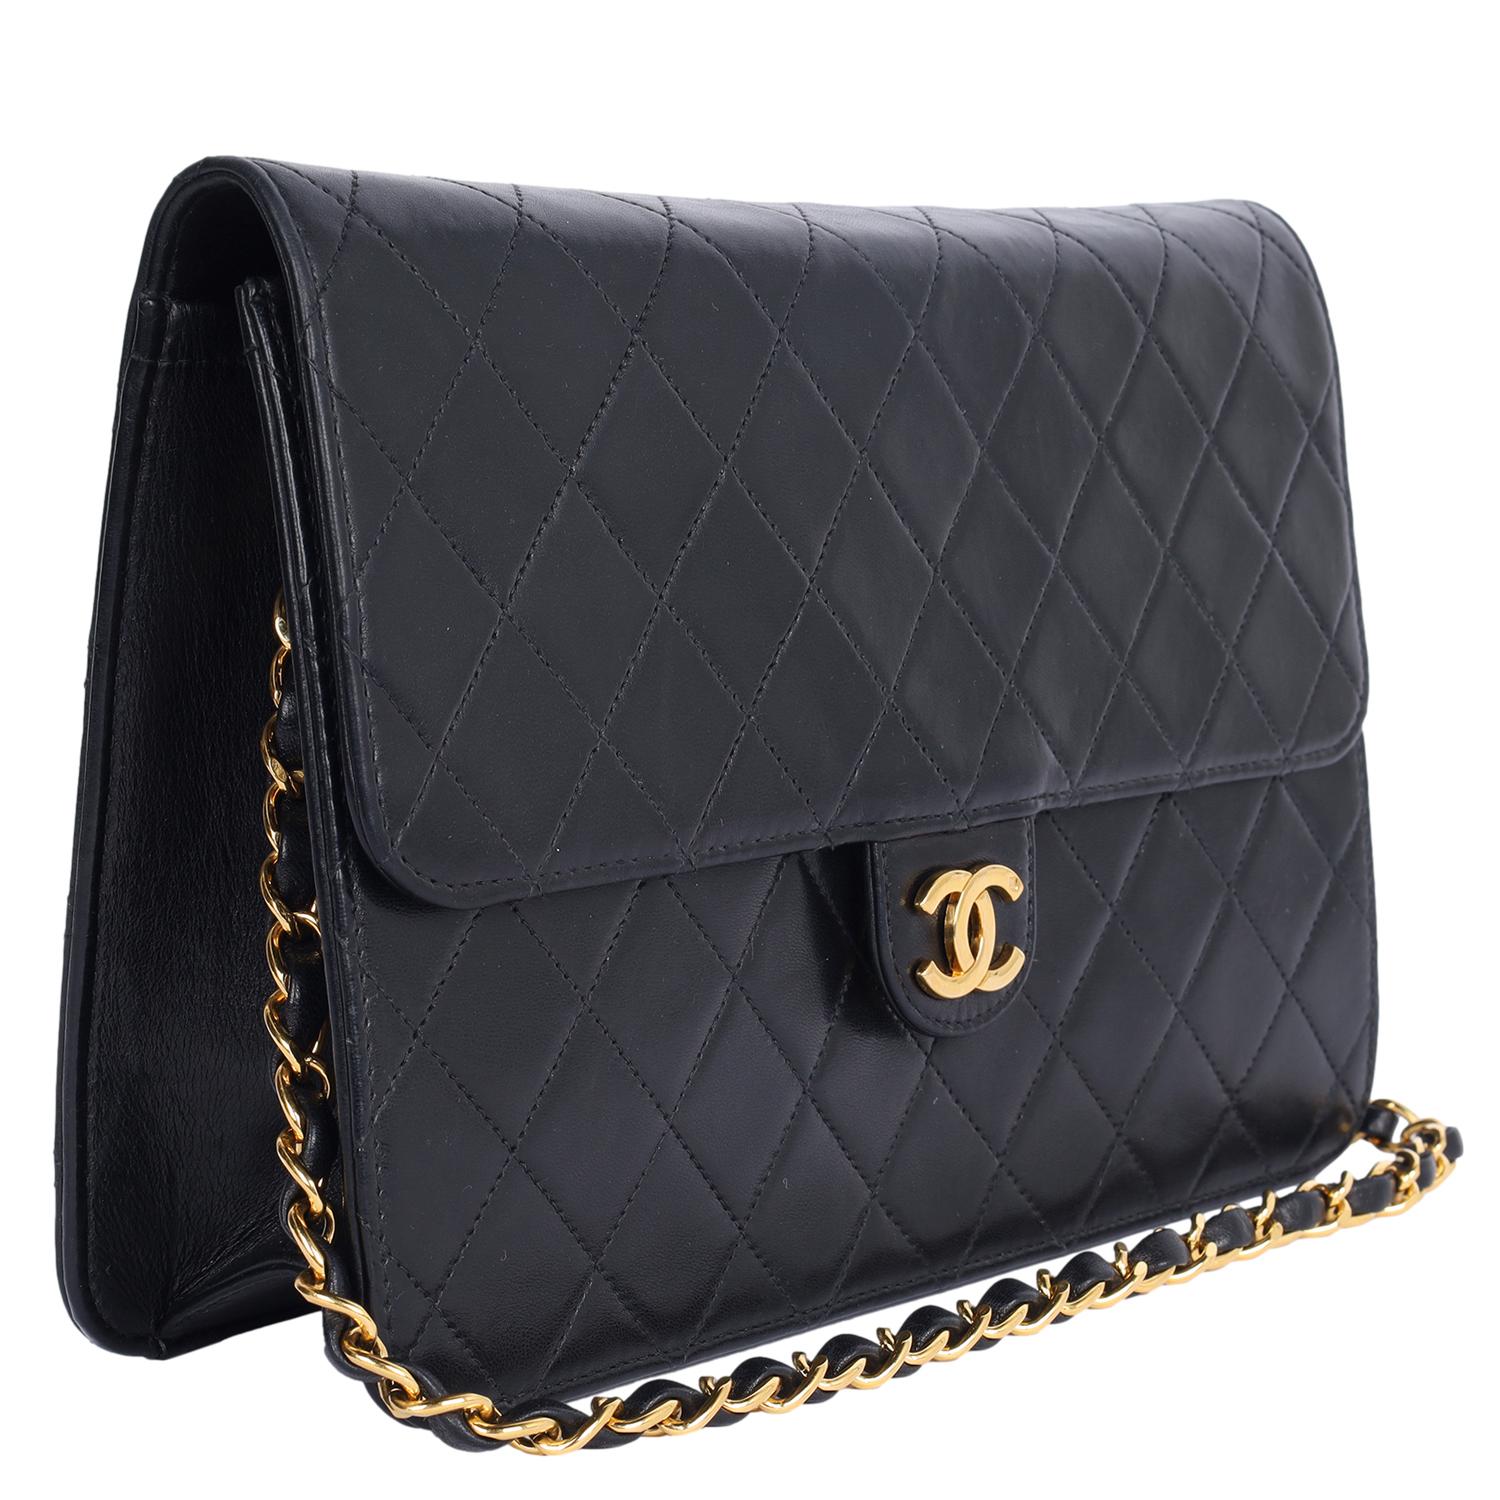 Chanel Black Classic Front Flap Quilted Leather Shoulder Bag In Good Condition For Sale In Salt Lake Cty, UT